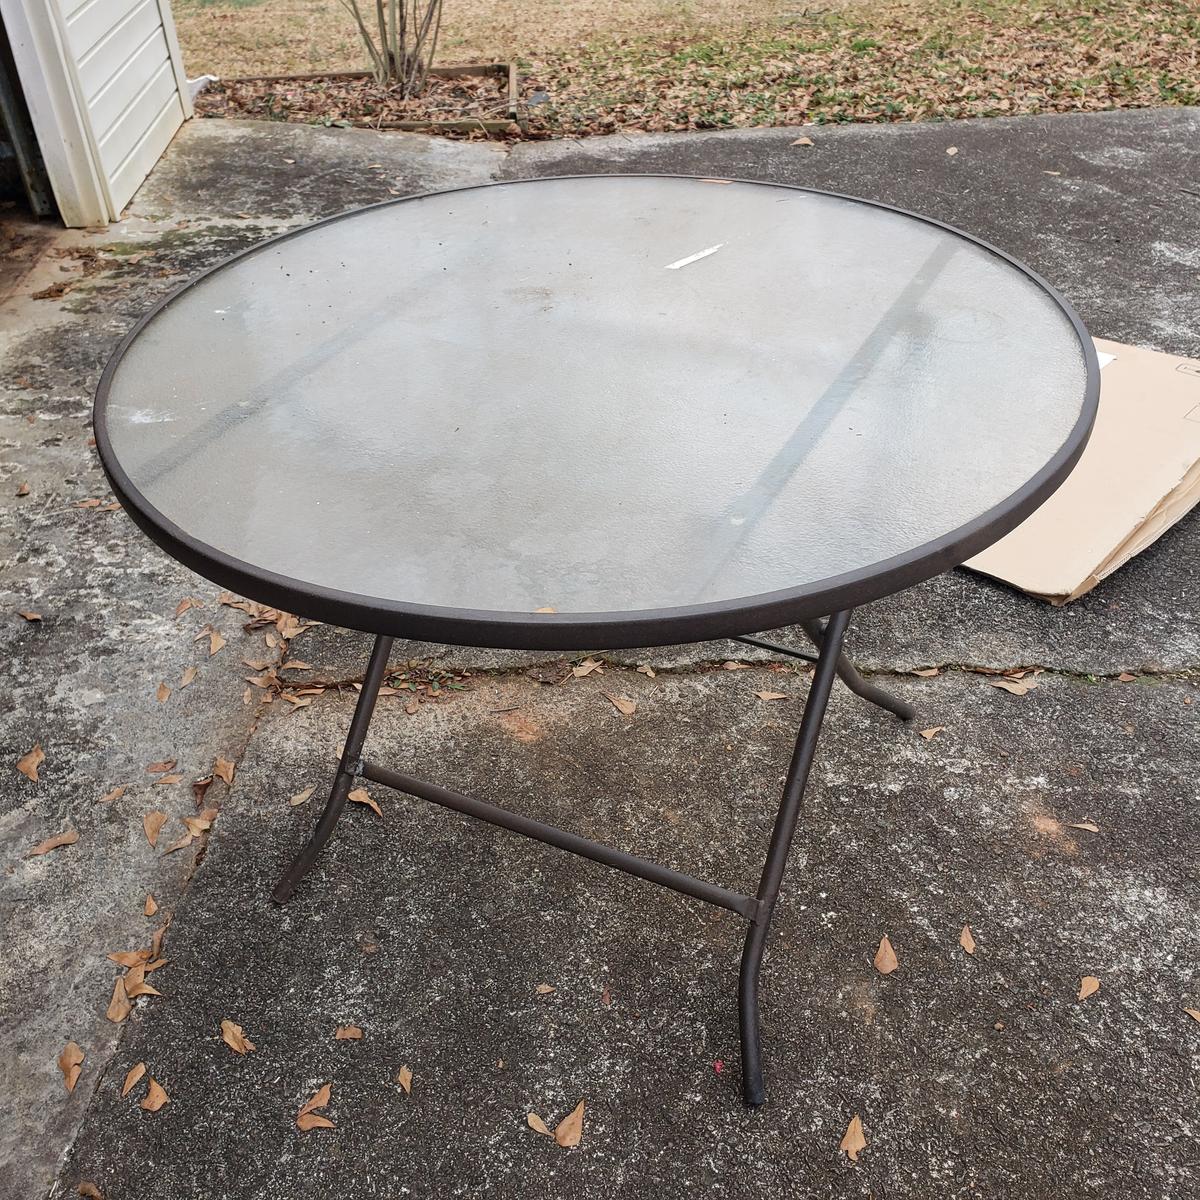 Mainstays Folding Glass Top Patio Table